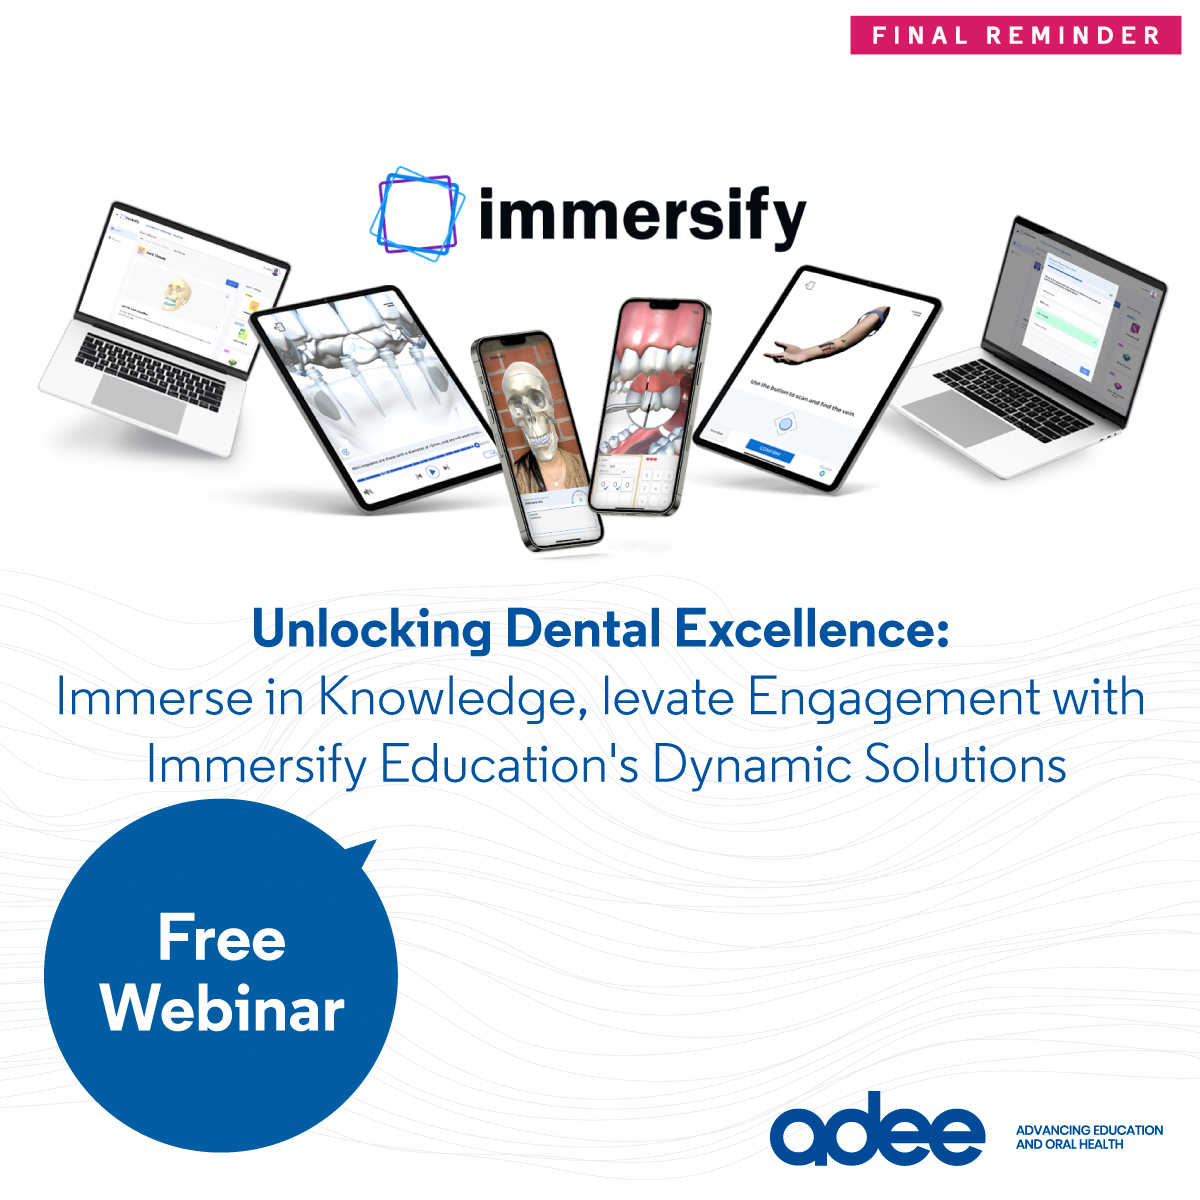 📢Last chance to register: Tomorrow, wednesday 3rd April at 15:00, join us and @immersify_ed in the free Webinar: Revolutionizing Dental Education 'Immersify's Impact on Student Engagement'. Register here: us02web.zoom.us/webinar/regist… #Adee #Immersify #freewebinar